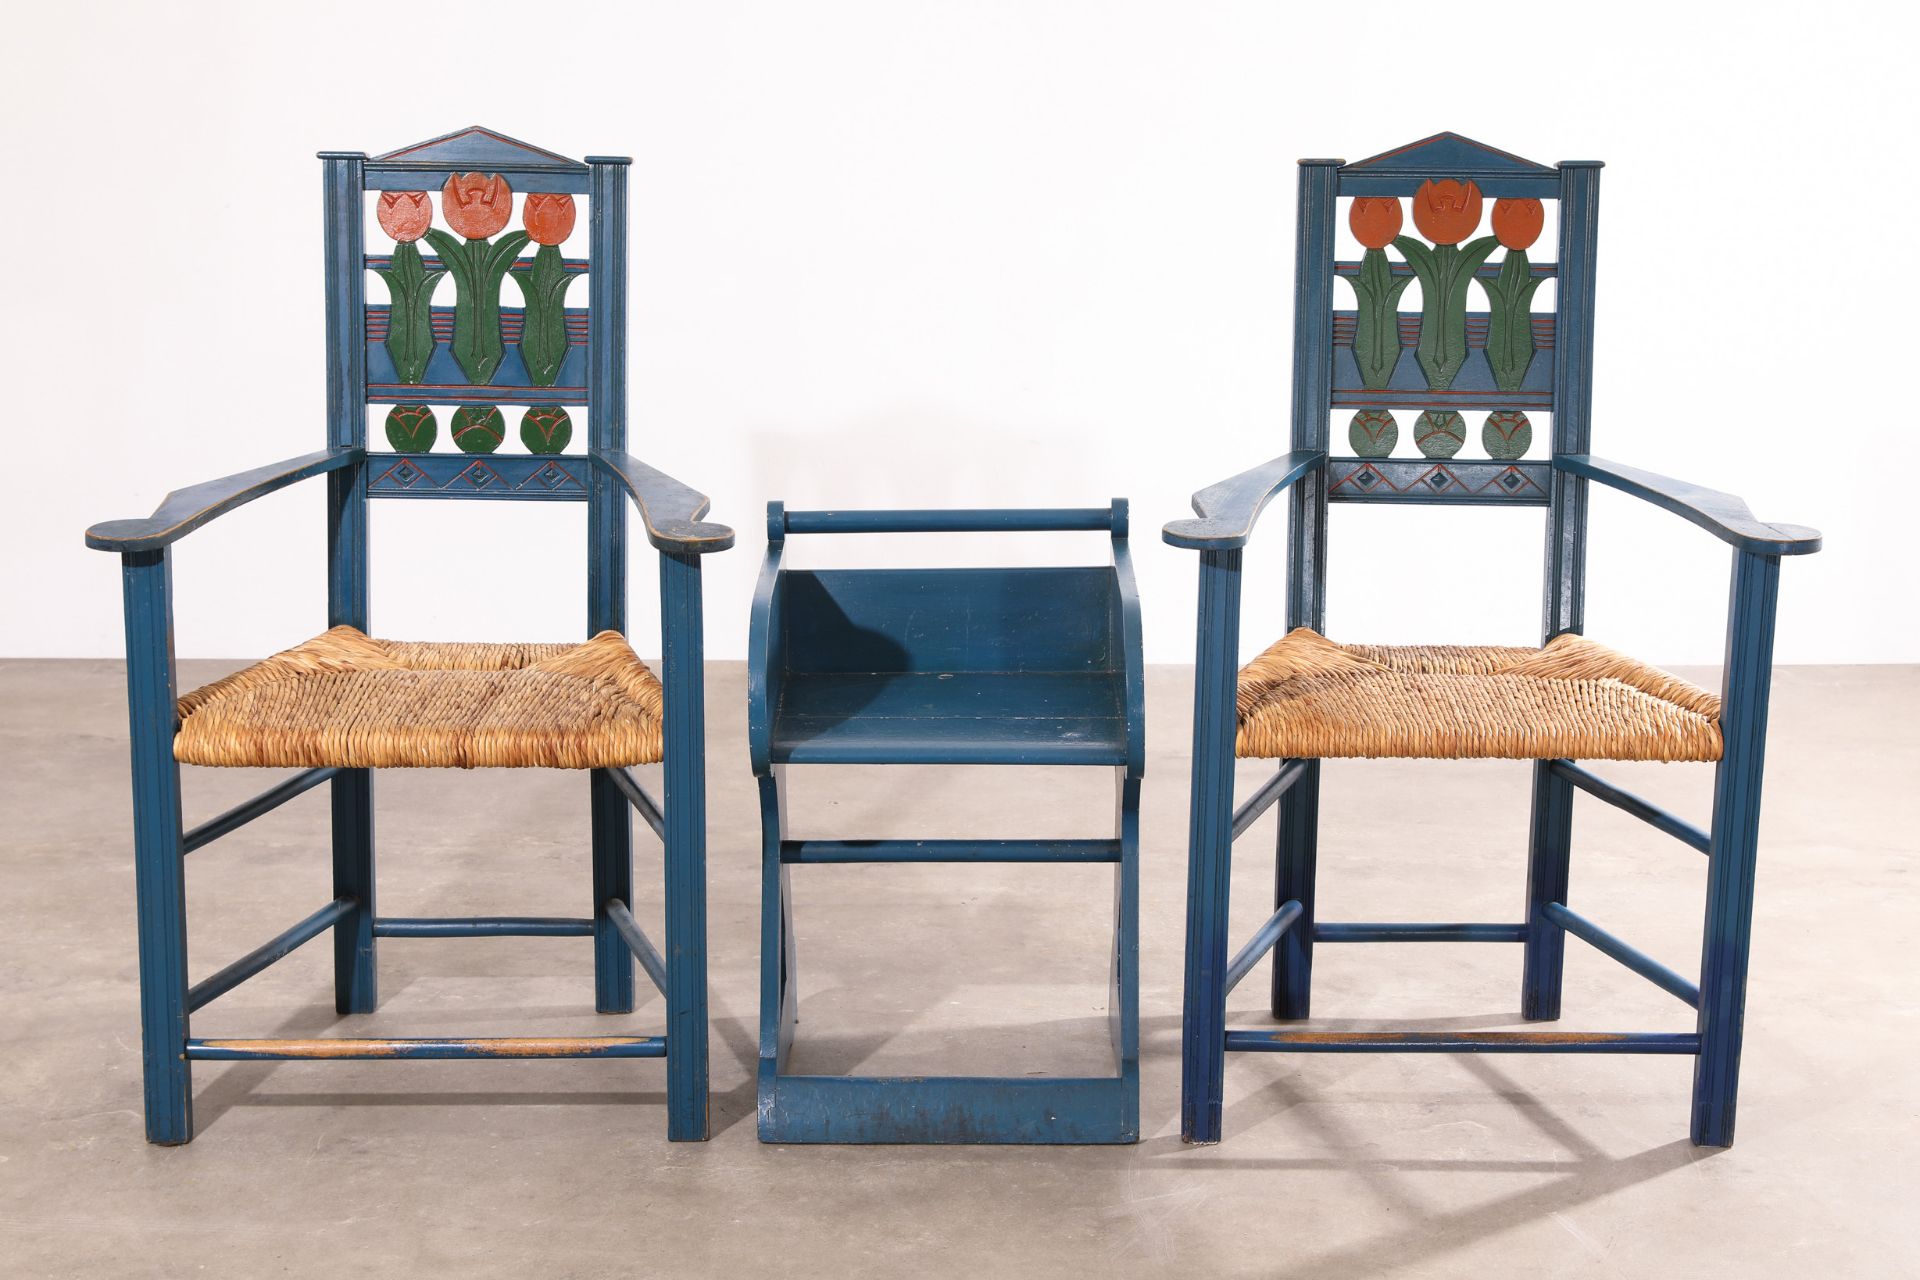 Heinrich Vogeler, 2 chairs and stools, model Tulpe / Tulip - Image 2 of 5